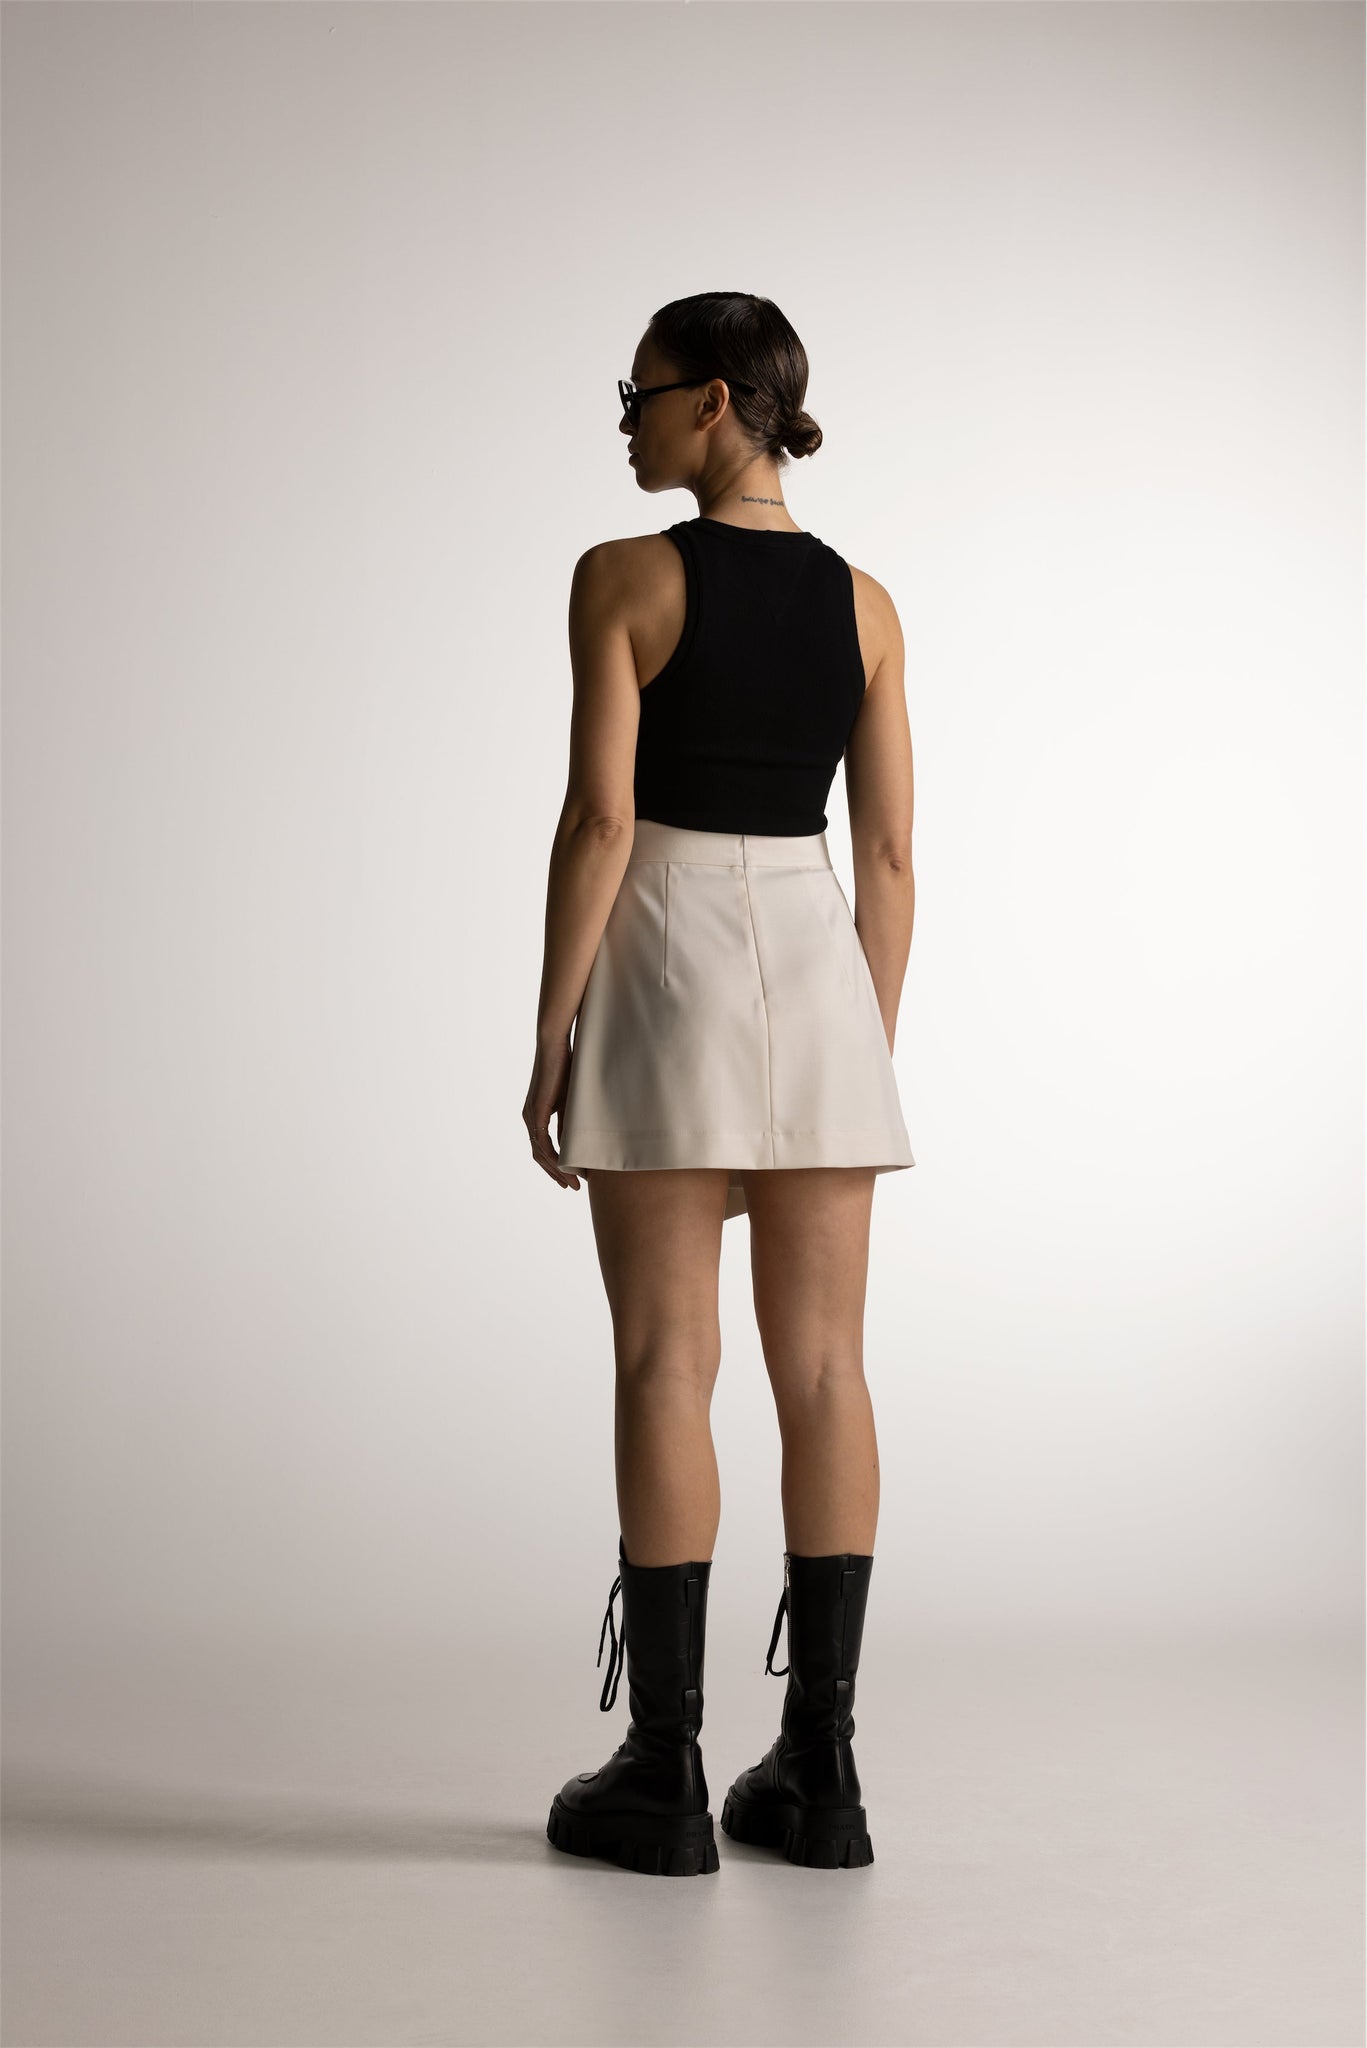 PIXIE WON'T PLAY STARCITY MINI SKIRT ECRU WHITE STYLISH WOOL SILK FABRIC CLASSIC DESIGN VERSATILE PROFESSIONAL ATTIRE SPRING SUMMER FALL WINTER FASHION SOPHISTICATED BUSINESS CASUAL FASHION - FORWARDS TIMELESS WARDROBE STAPLE SUSTAINABLE LUXURY CAPSULE COLLECTION ESSENTIALS ELEGANT TRENDY COMFORTABLE CHIC FEMININE DAY TO NIGHT WEAR